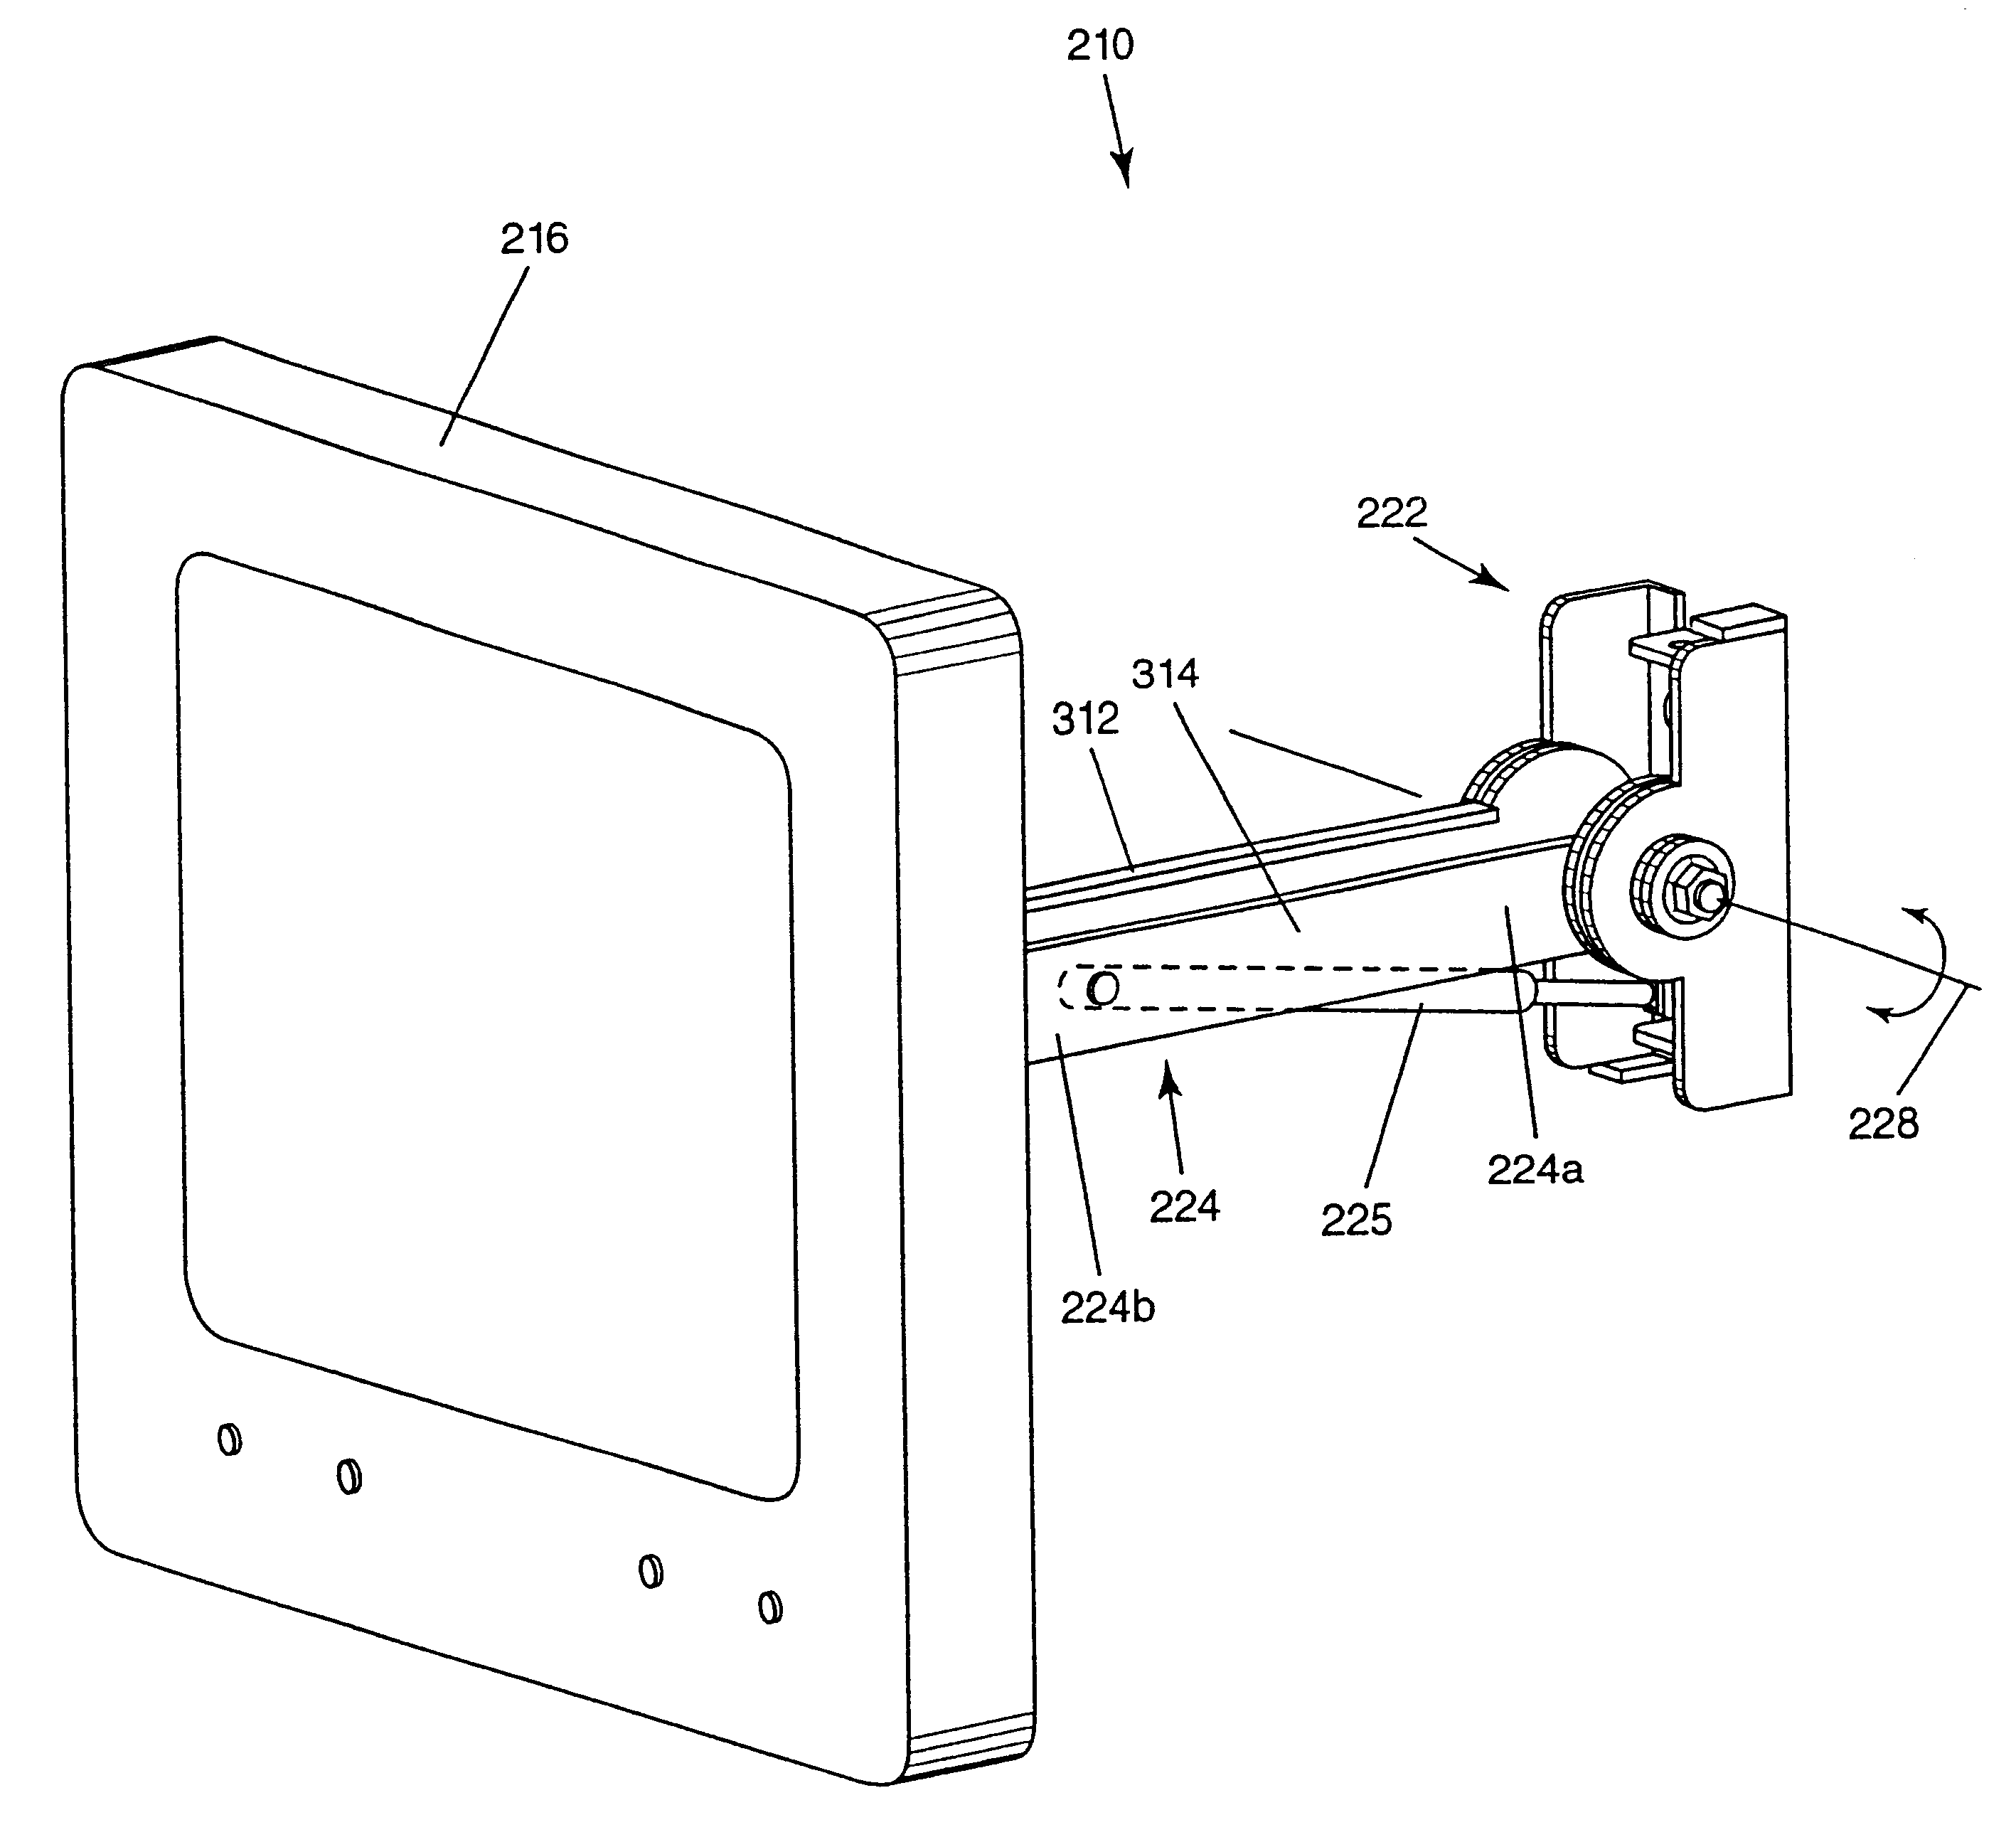 Pivot assembly and support system